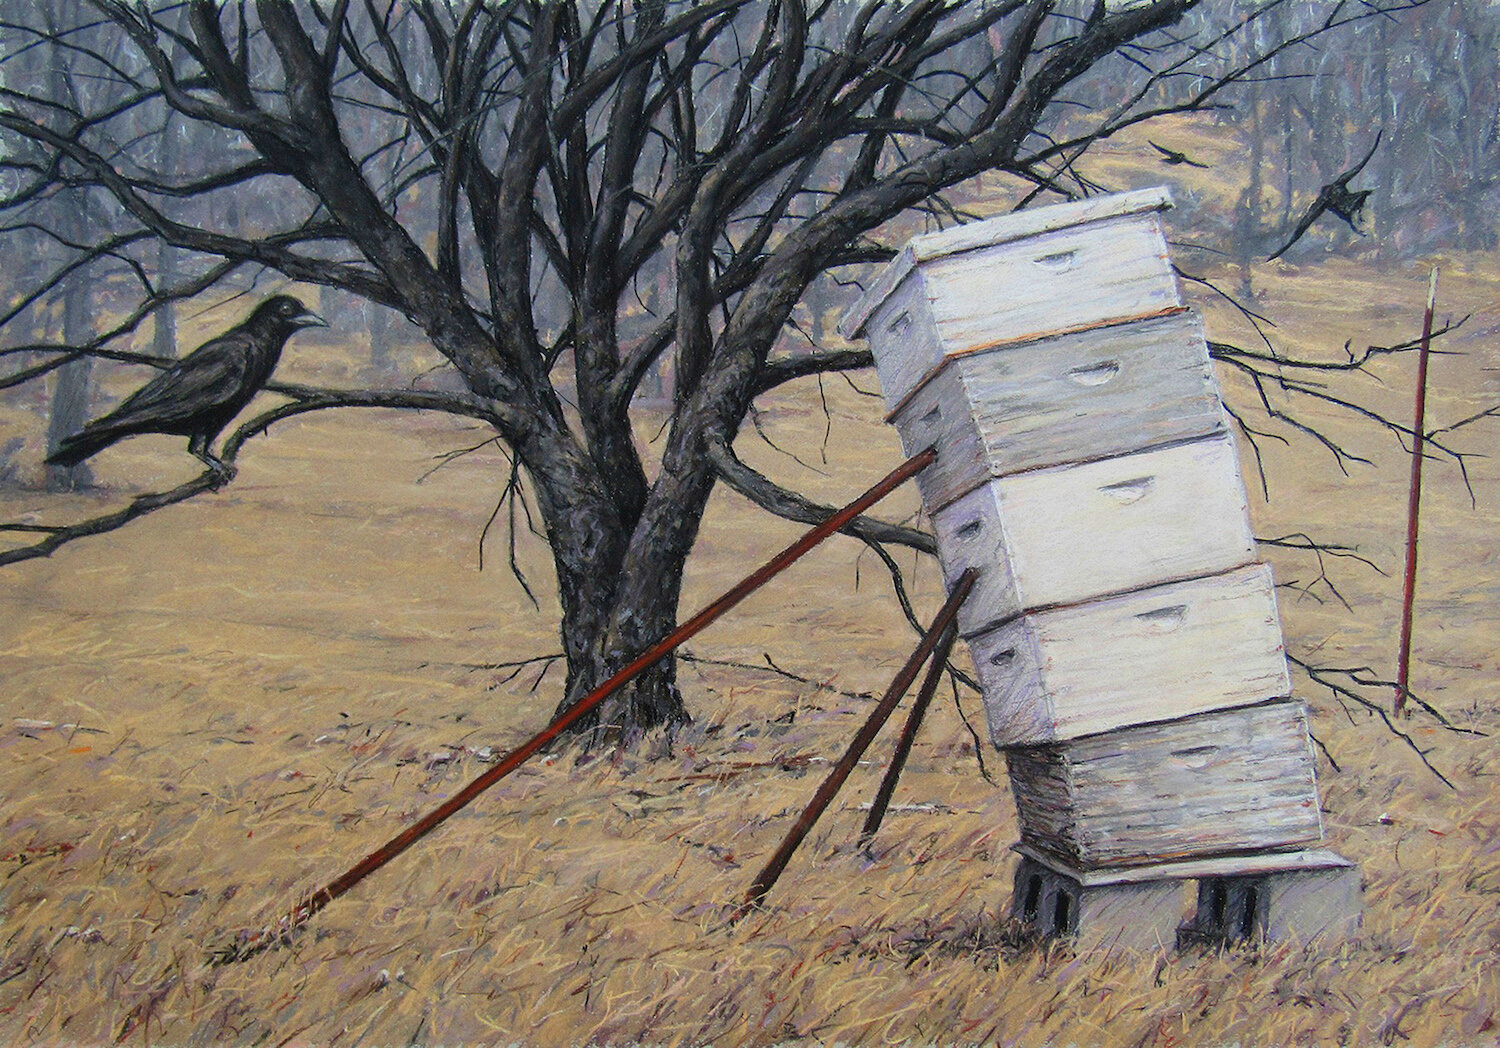    Collapsing Hive  , pastel on light grey paper, 18” x 26” 